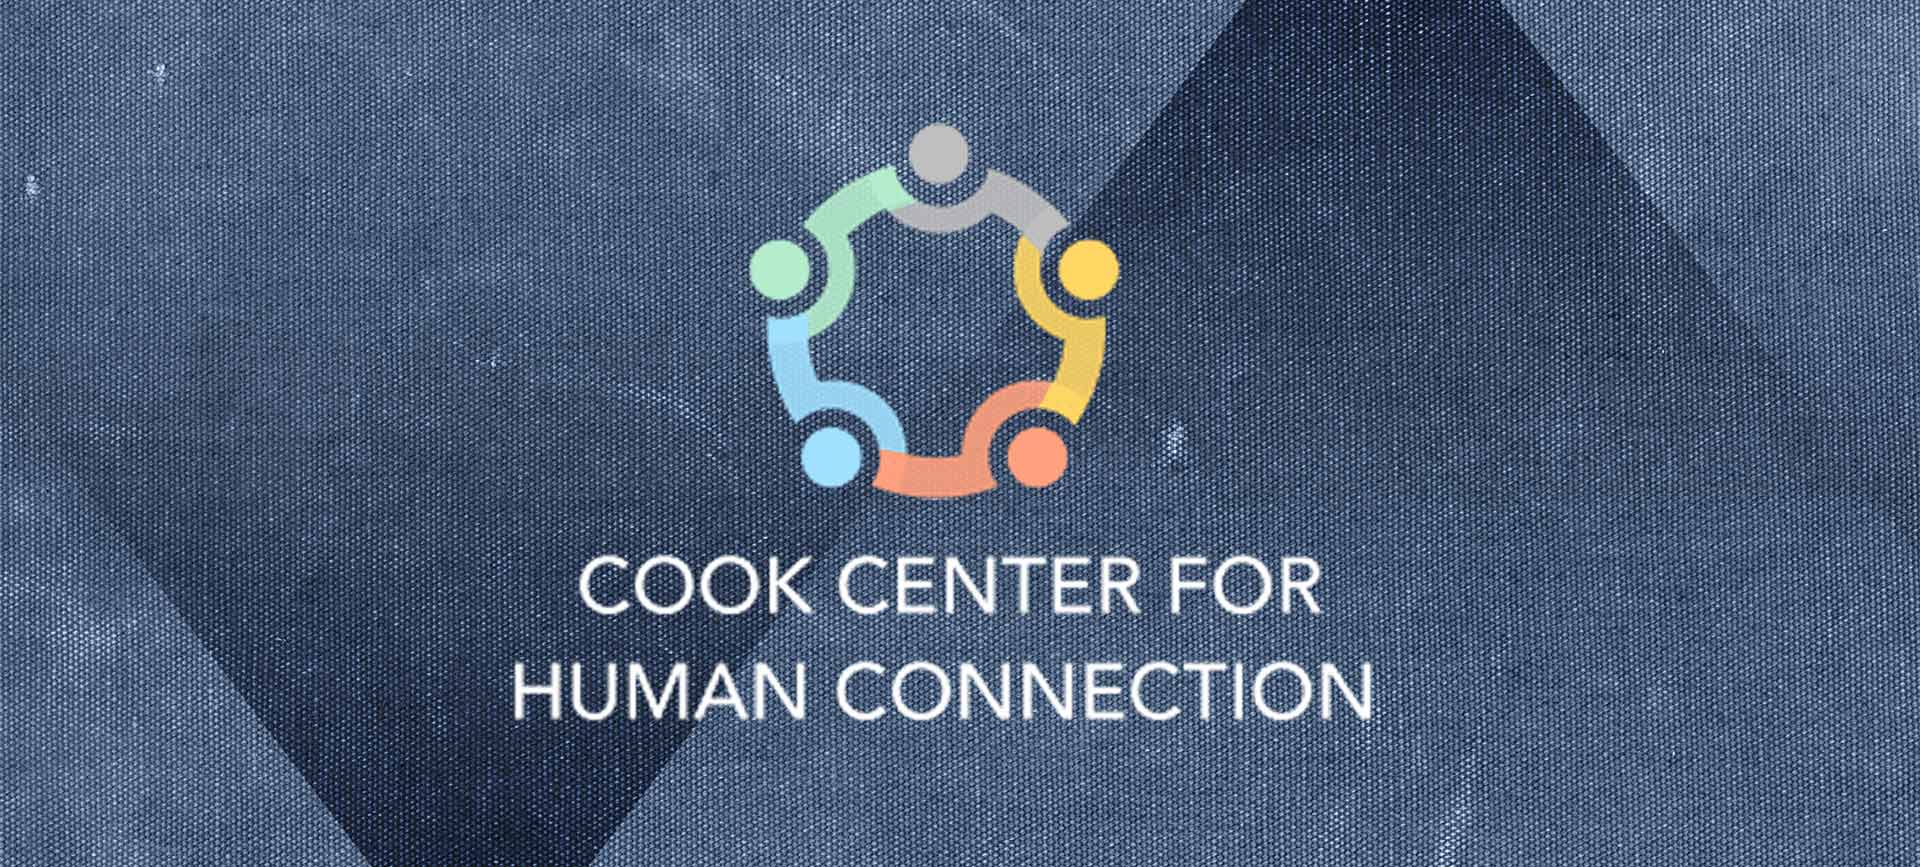 Cook Center for Human Connection multi-colored logo on dark blue background